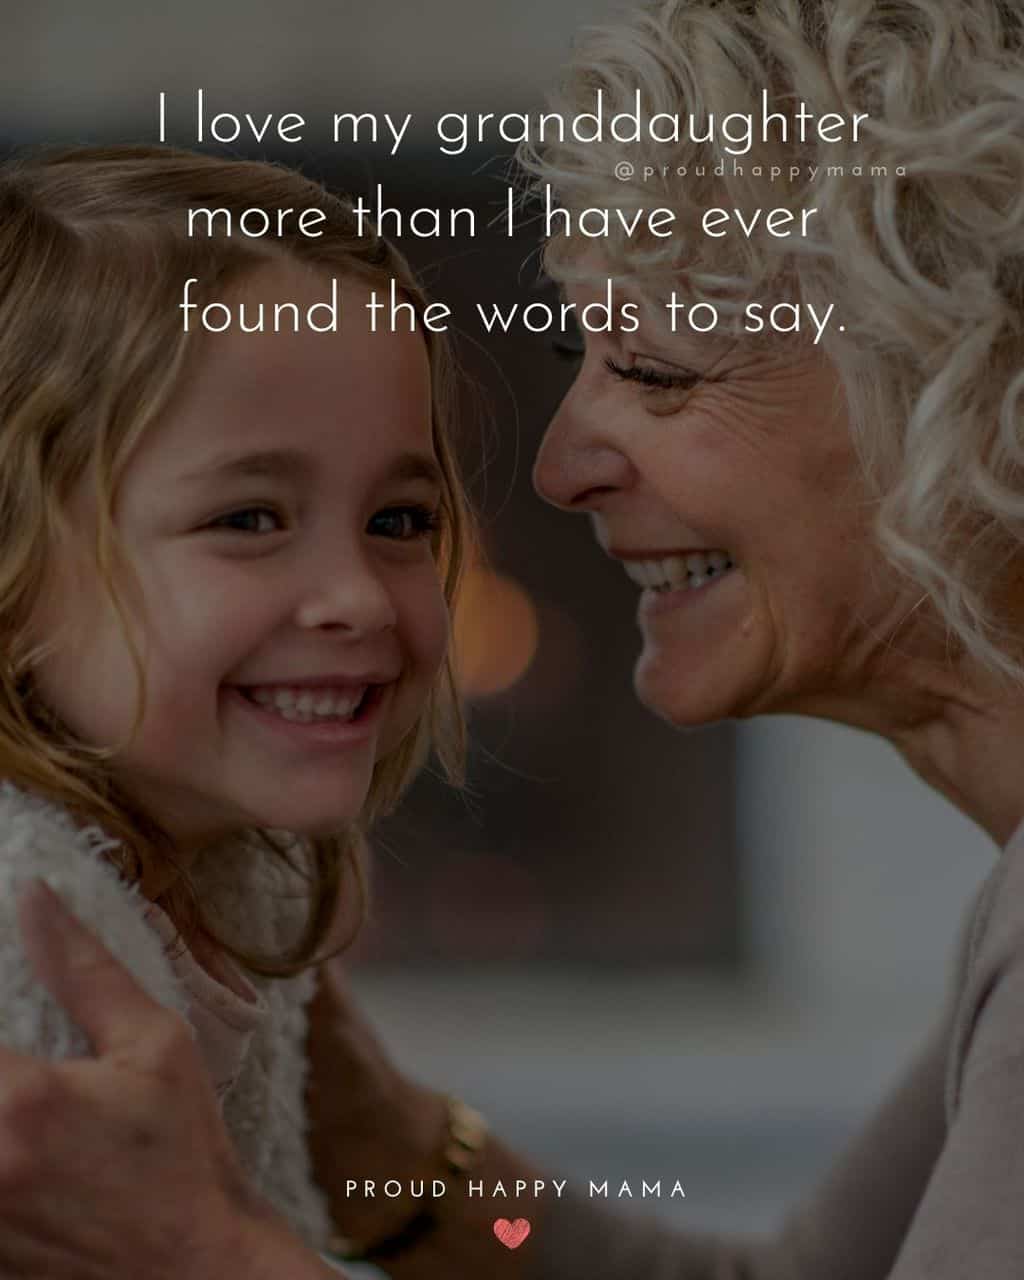 Granddaughter Quotes - I love my granddaughter more than I have ever found the words to say.’